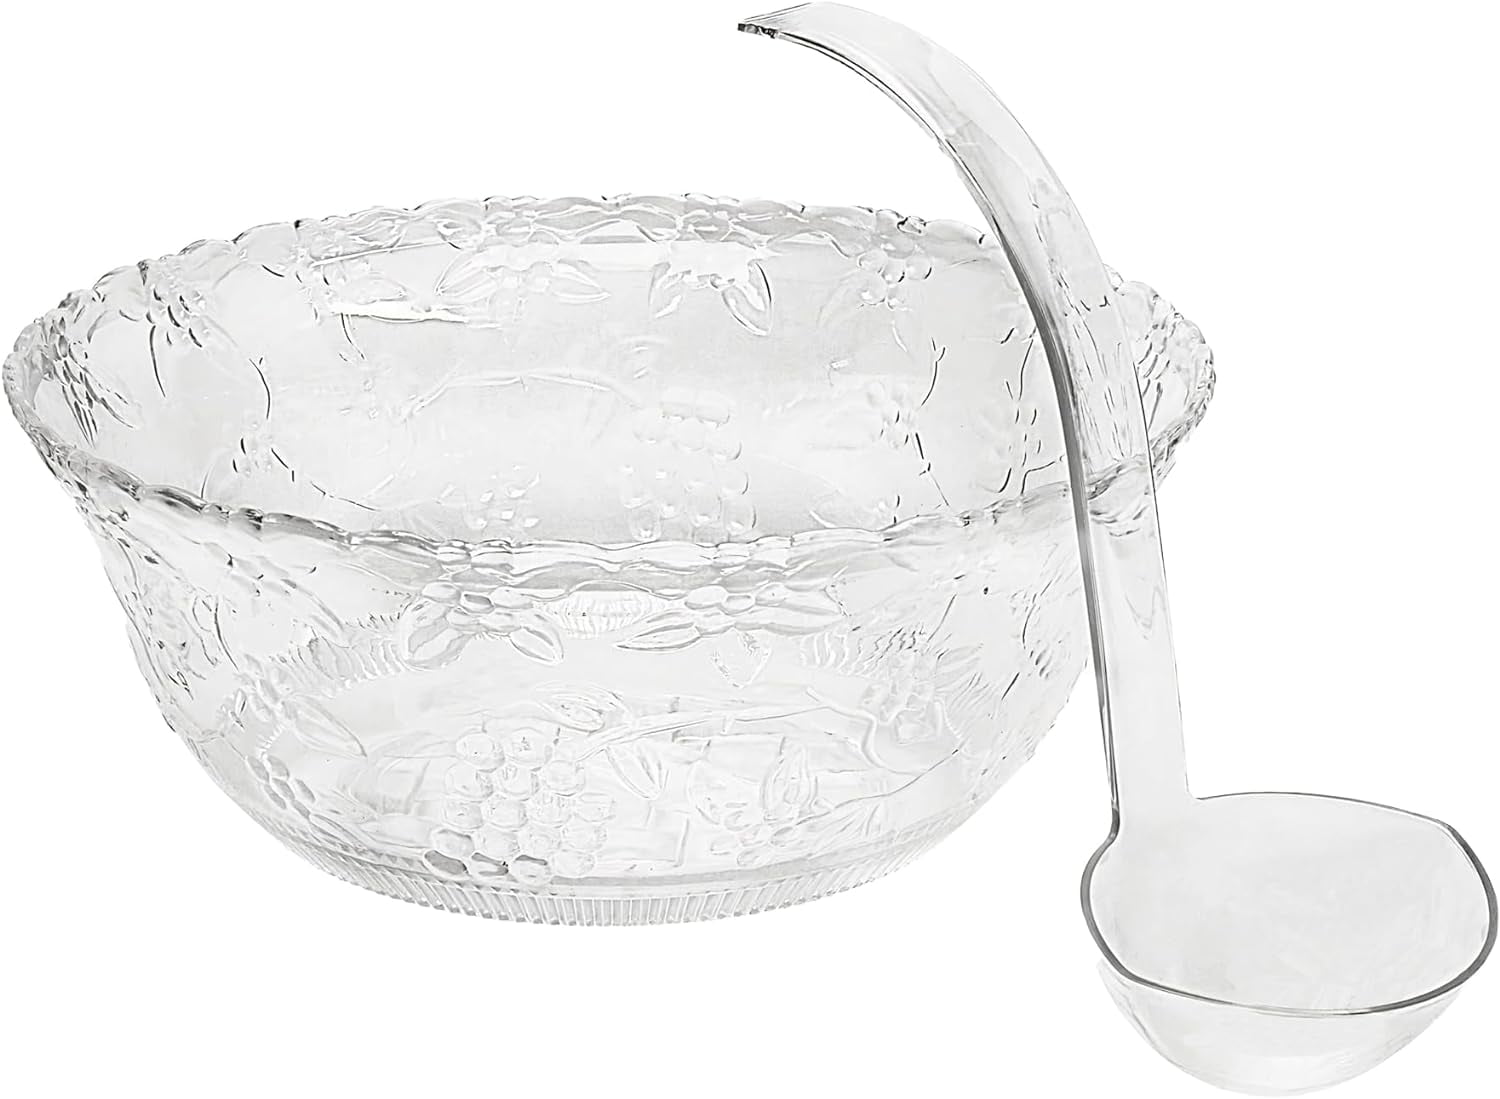 Premium Quality Plastic Punch Bowl With Ladle - Large 2 Gallon Bowl With 5  oz Ladle by Upper Midland Products